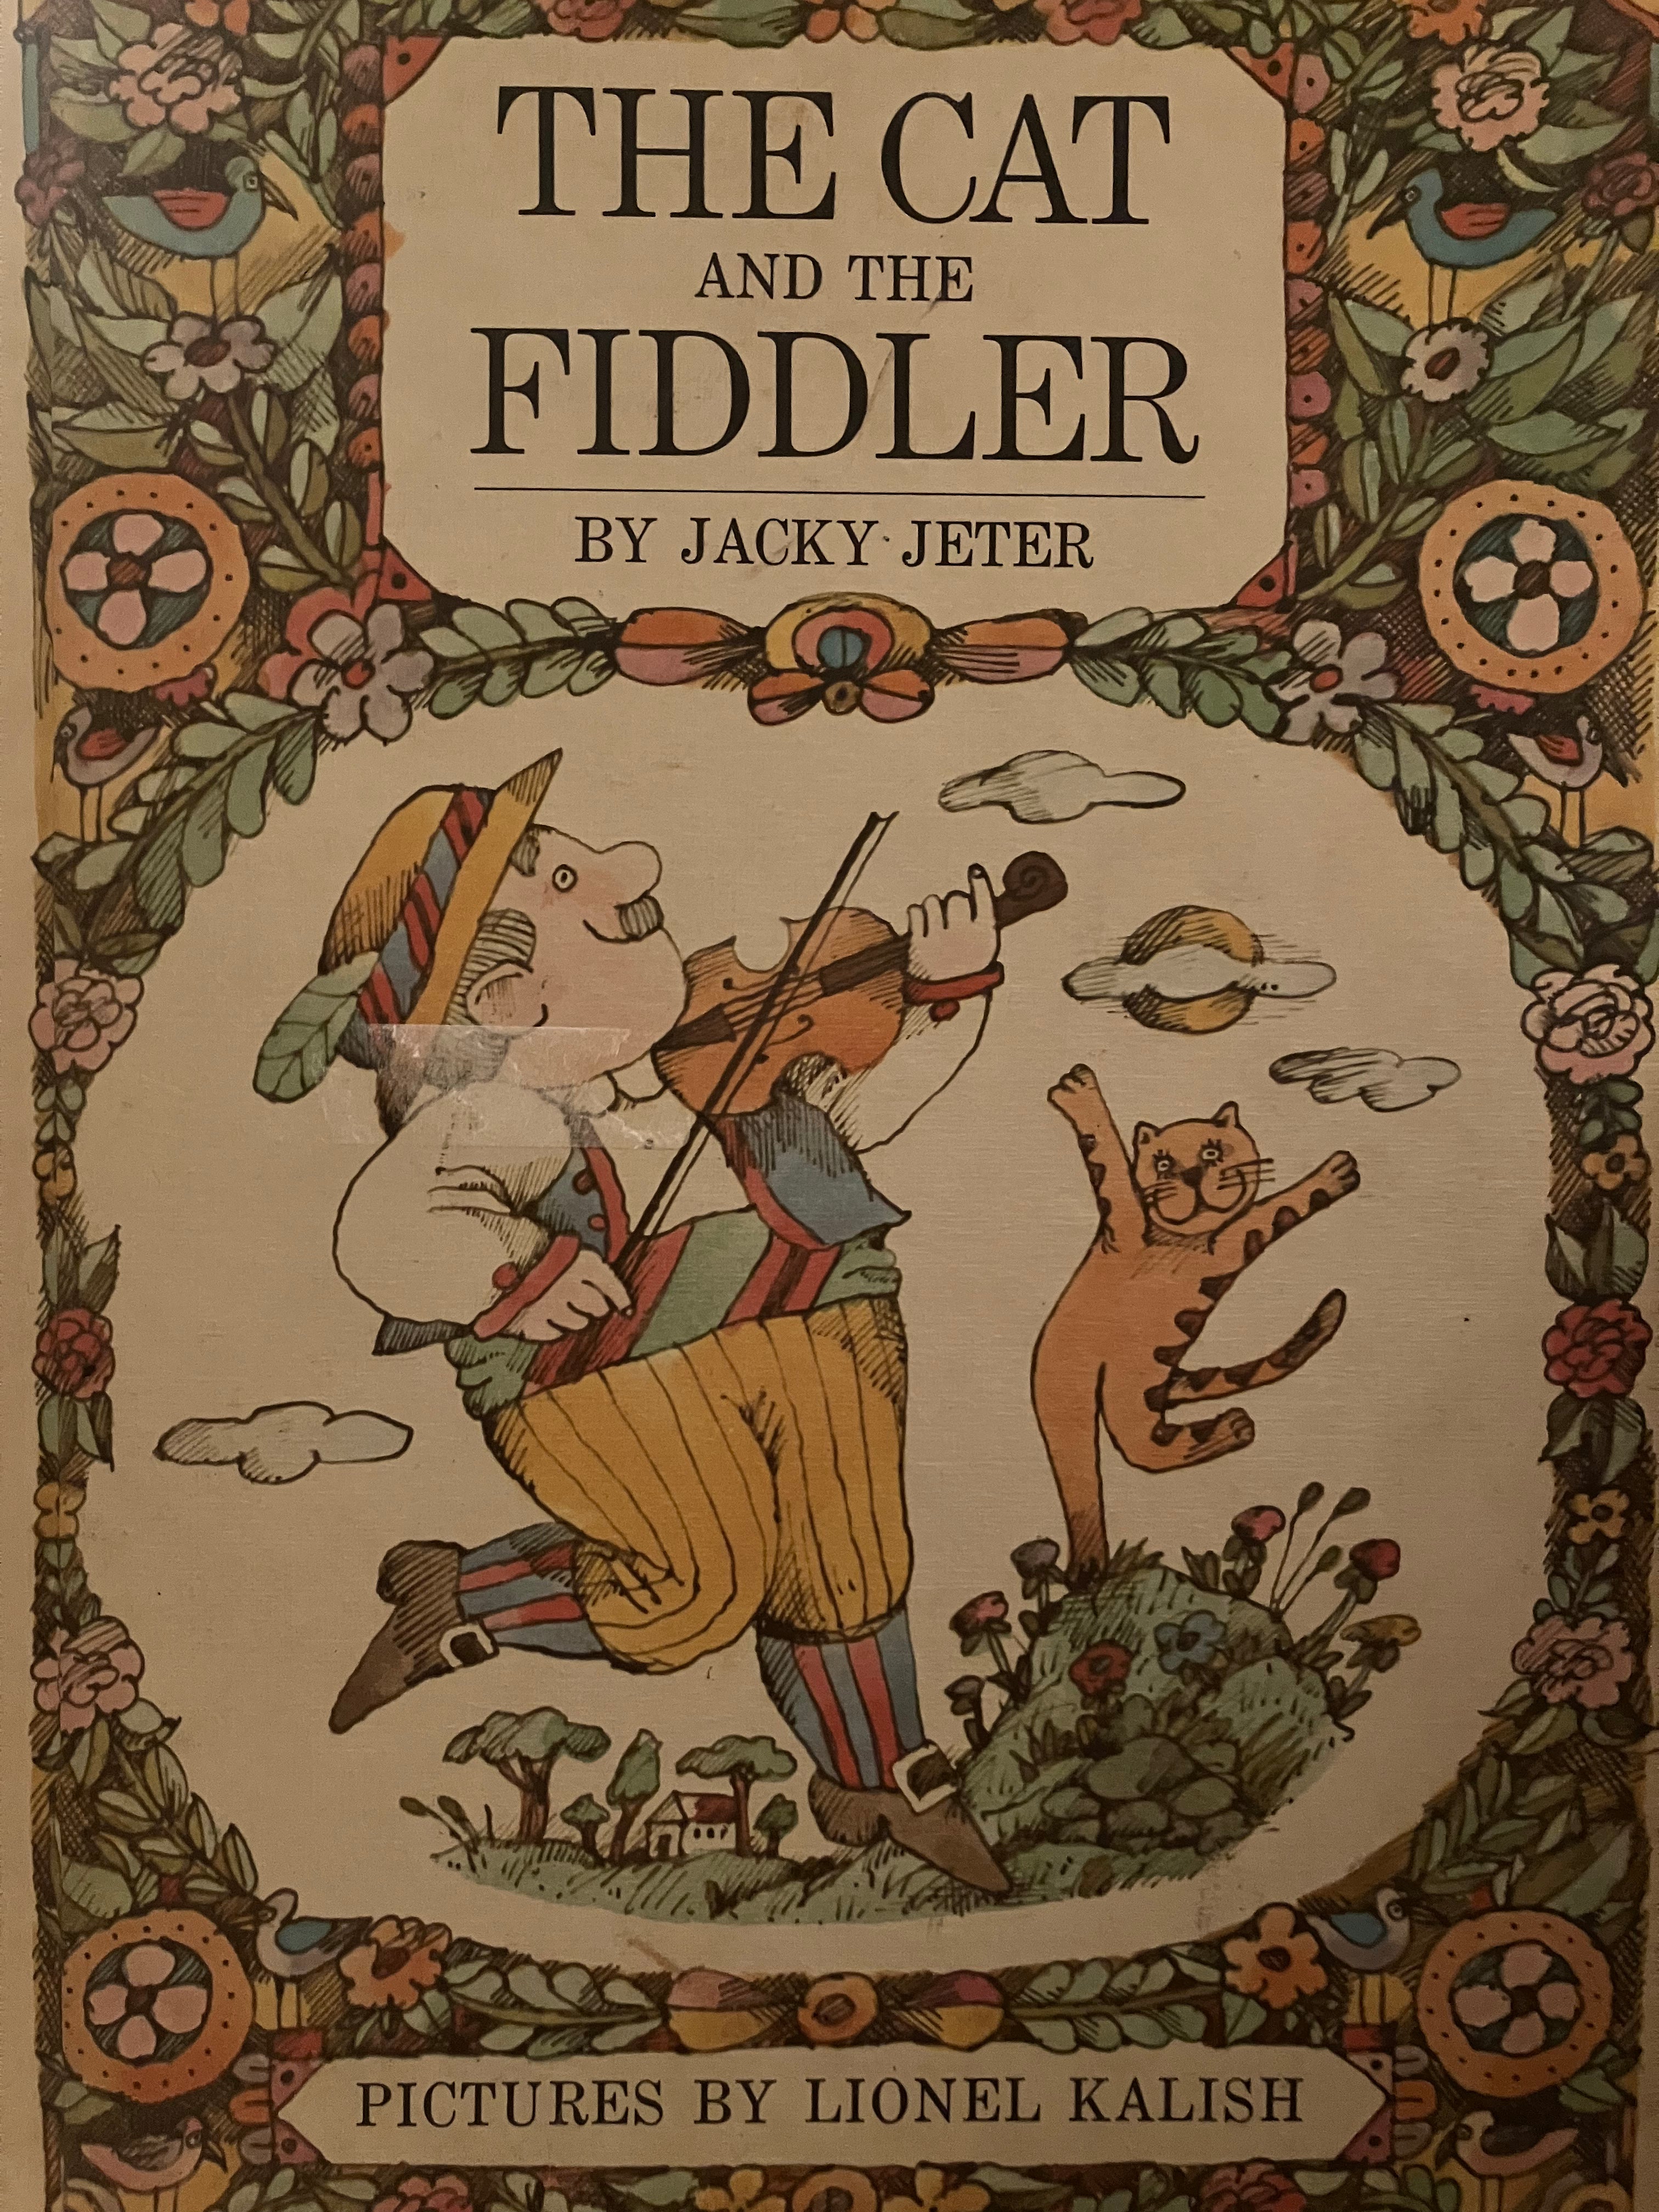 The Cat and the Fiddler Book